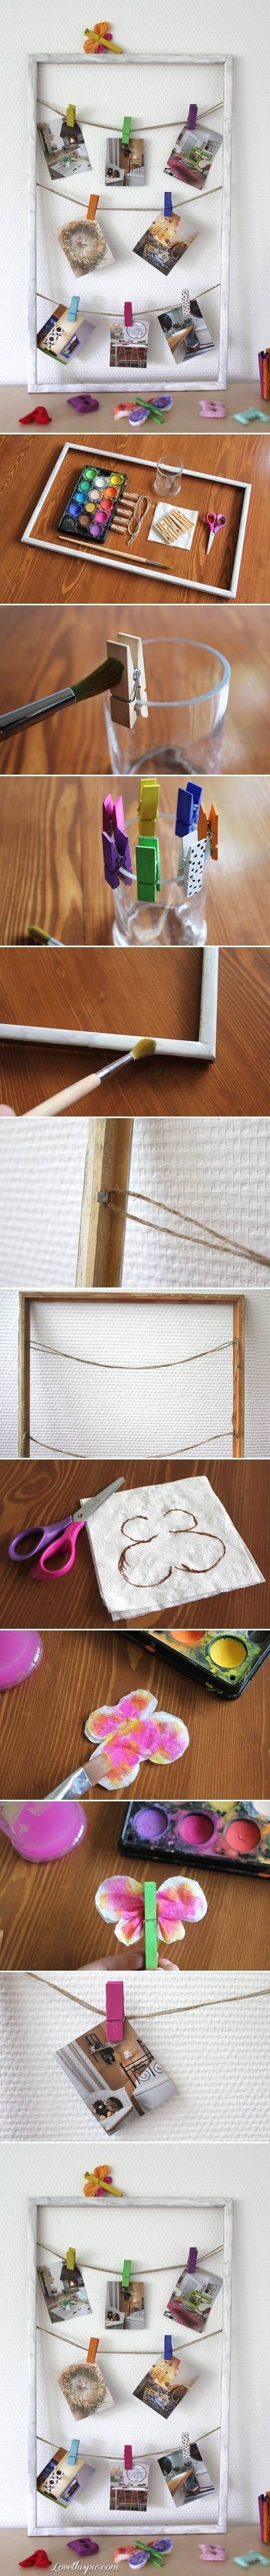 DIY Creative Hanging Picture Frame